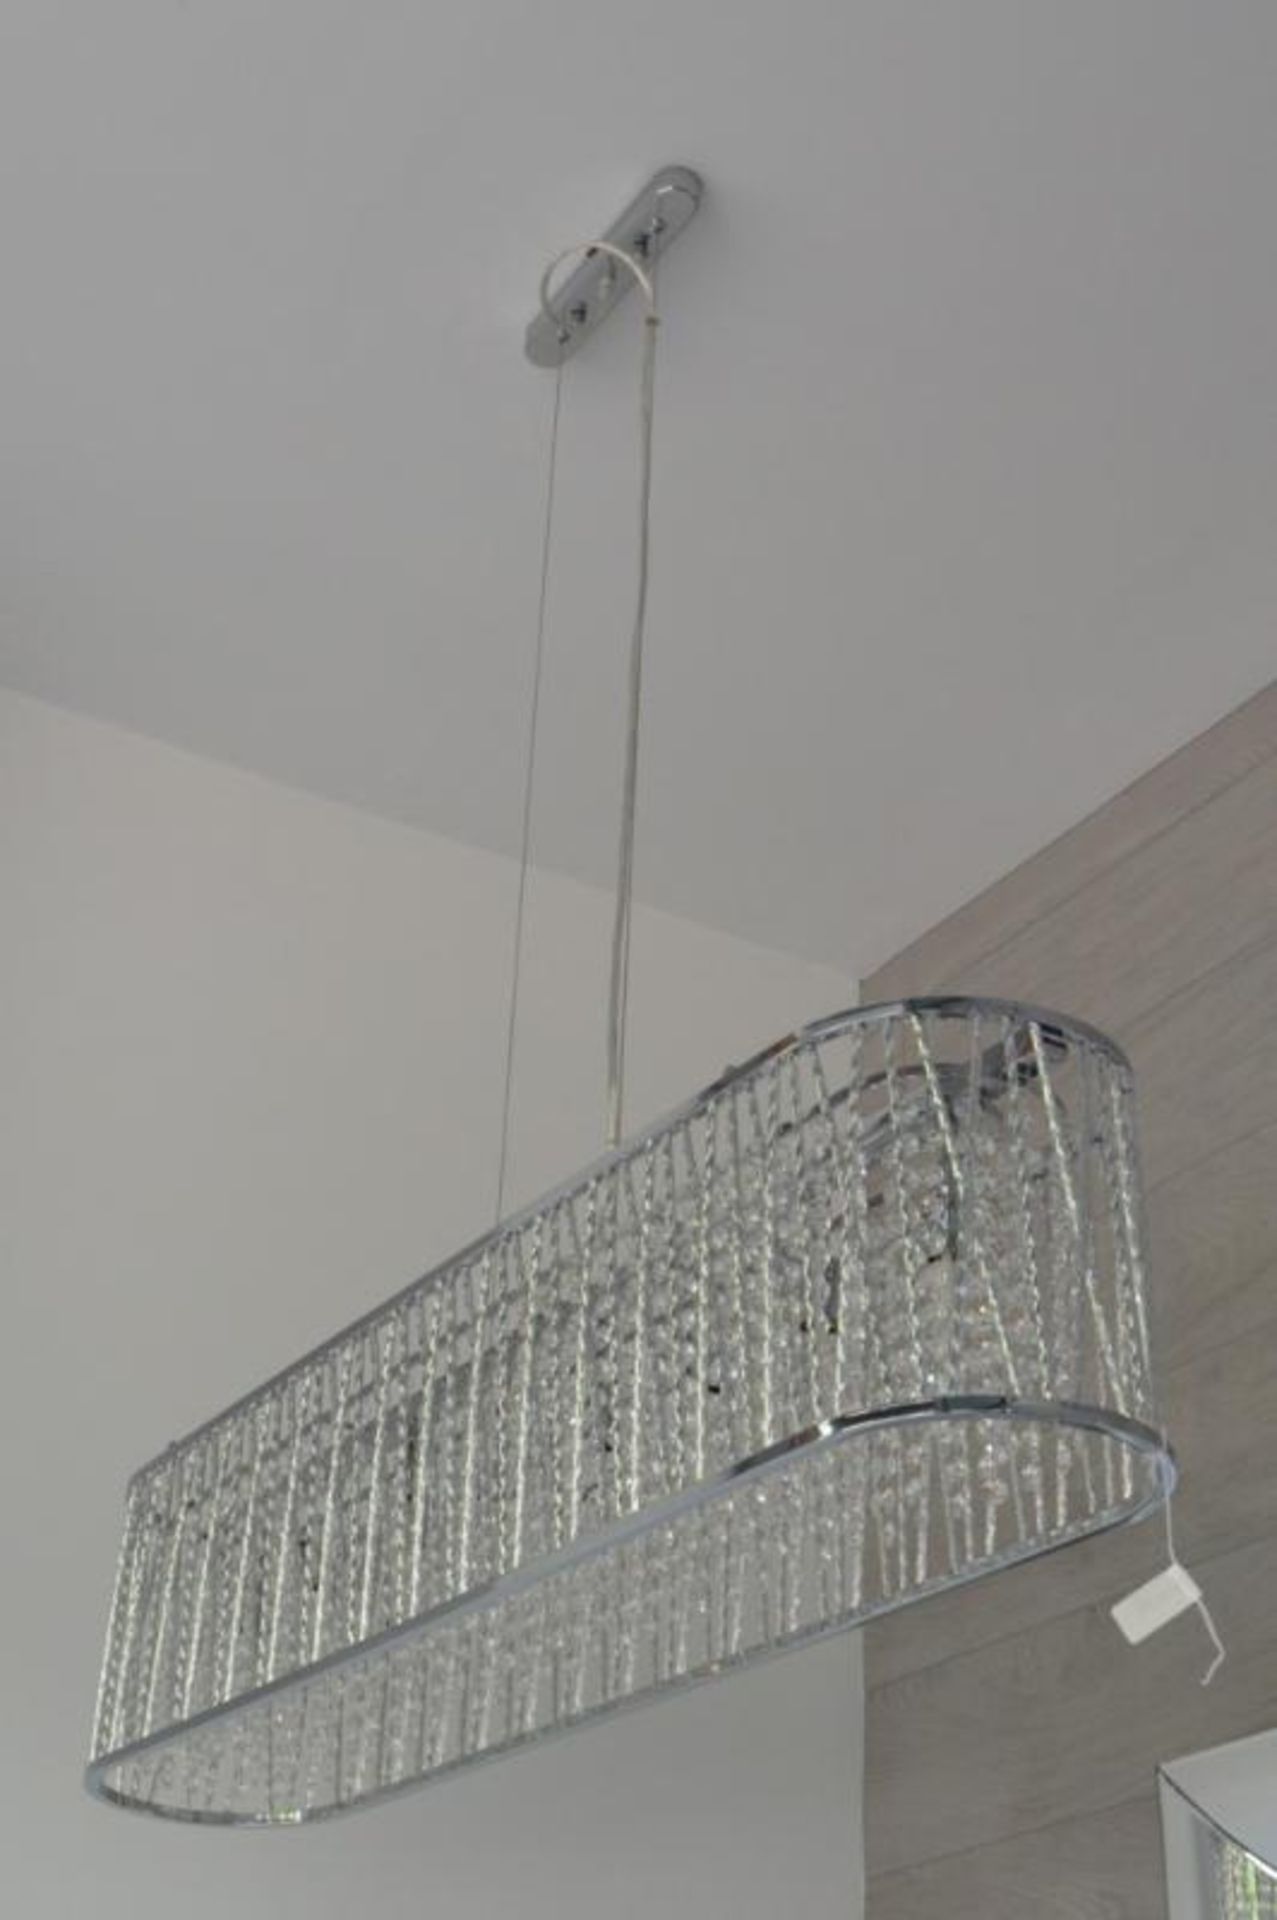 1 x Elise Chrome 8 Light Fitting With Crystal Button Drops - Ex Display Stock - CL298 - Ref J404 - L - Image 4 of 10